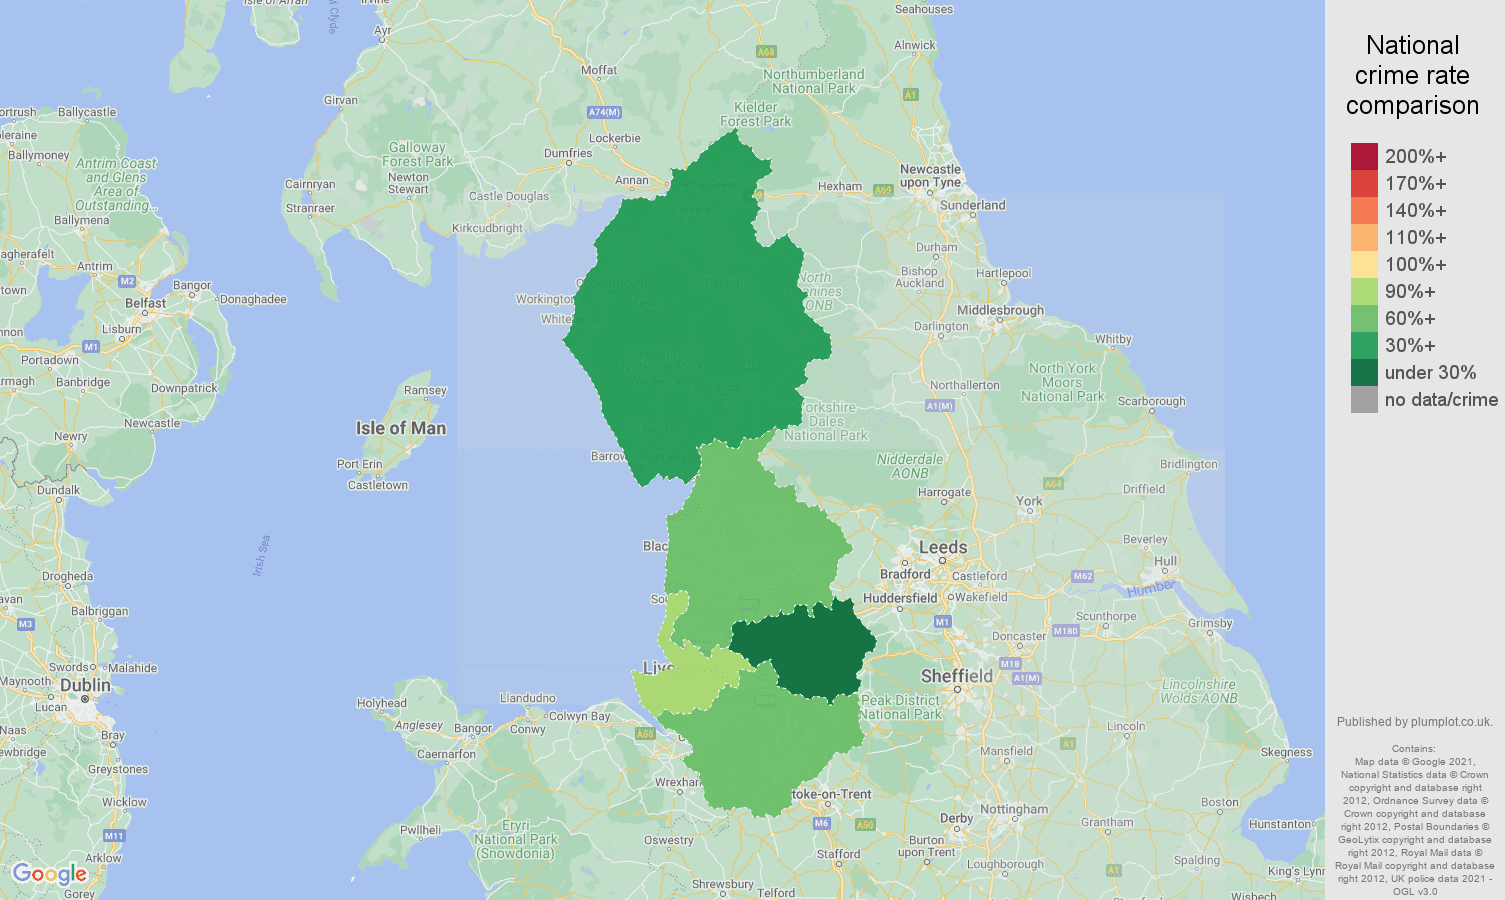 North West bicycle theft crime rate comparison map